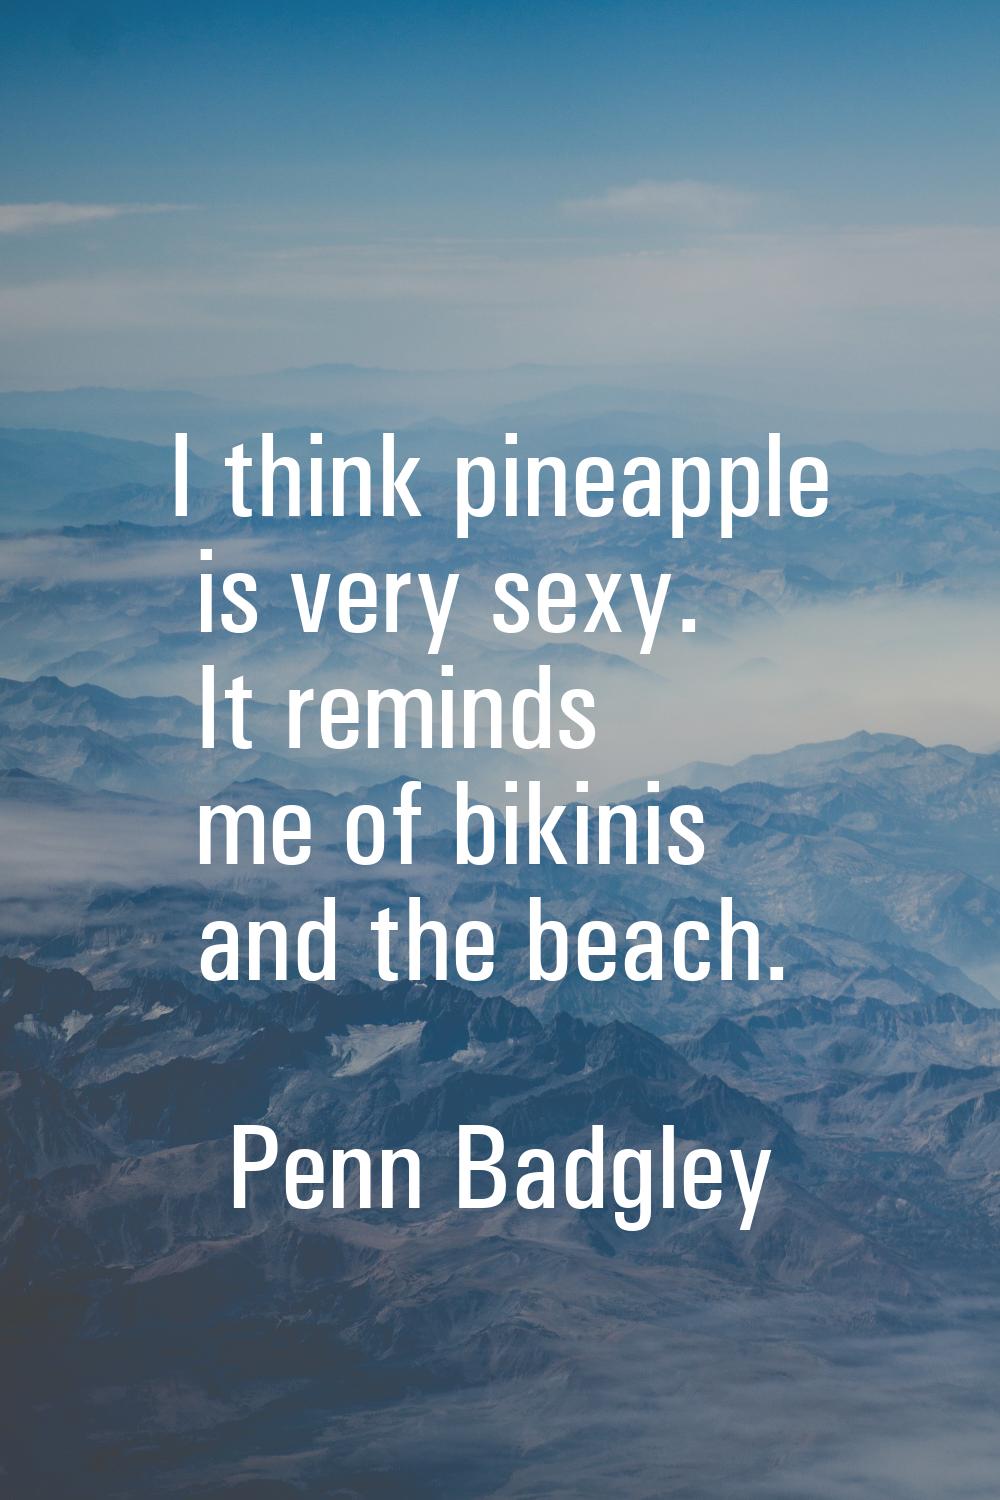 I think pineapple is very sexy. It reminds me of bikinis and the beach.